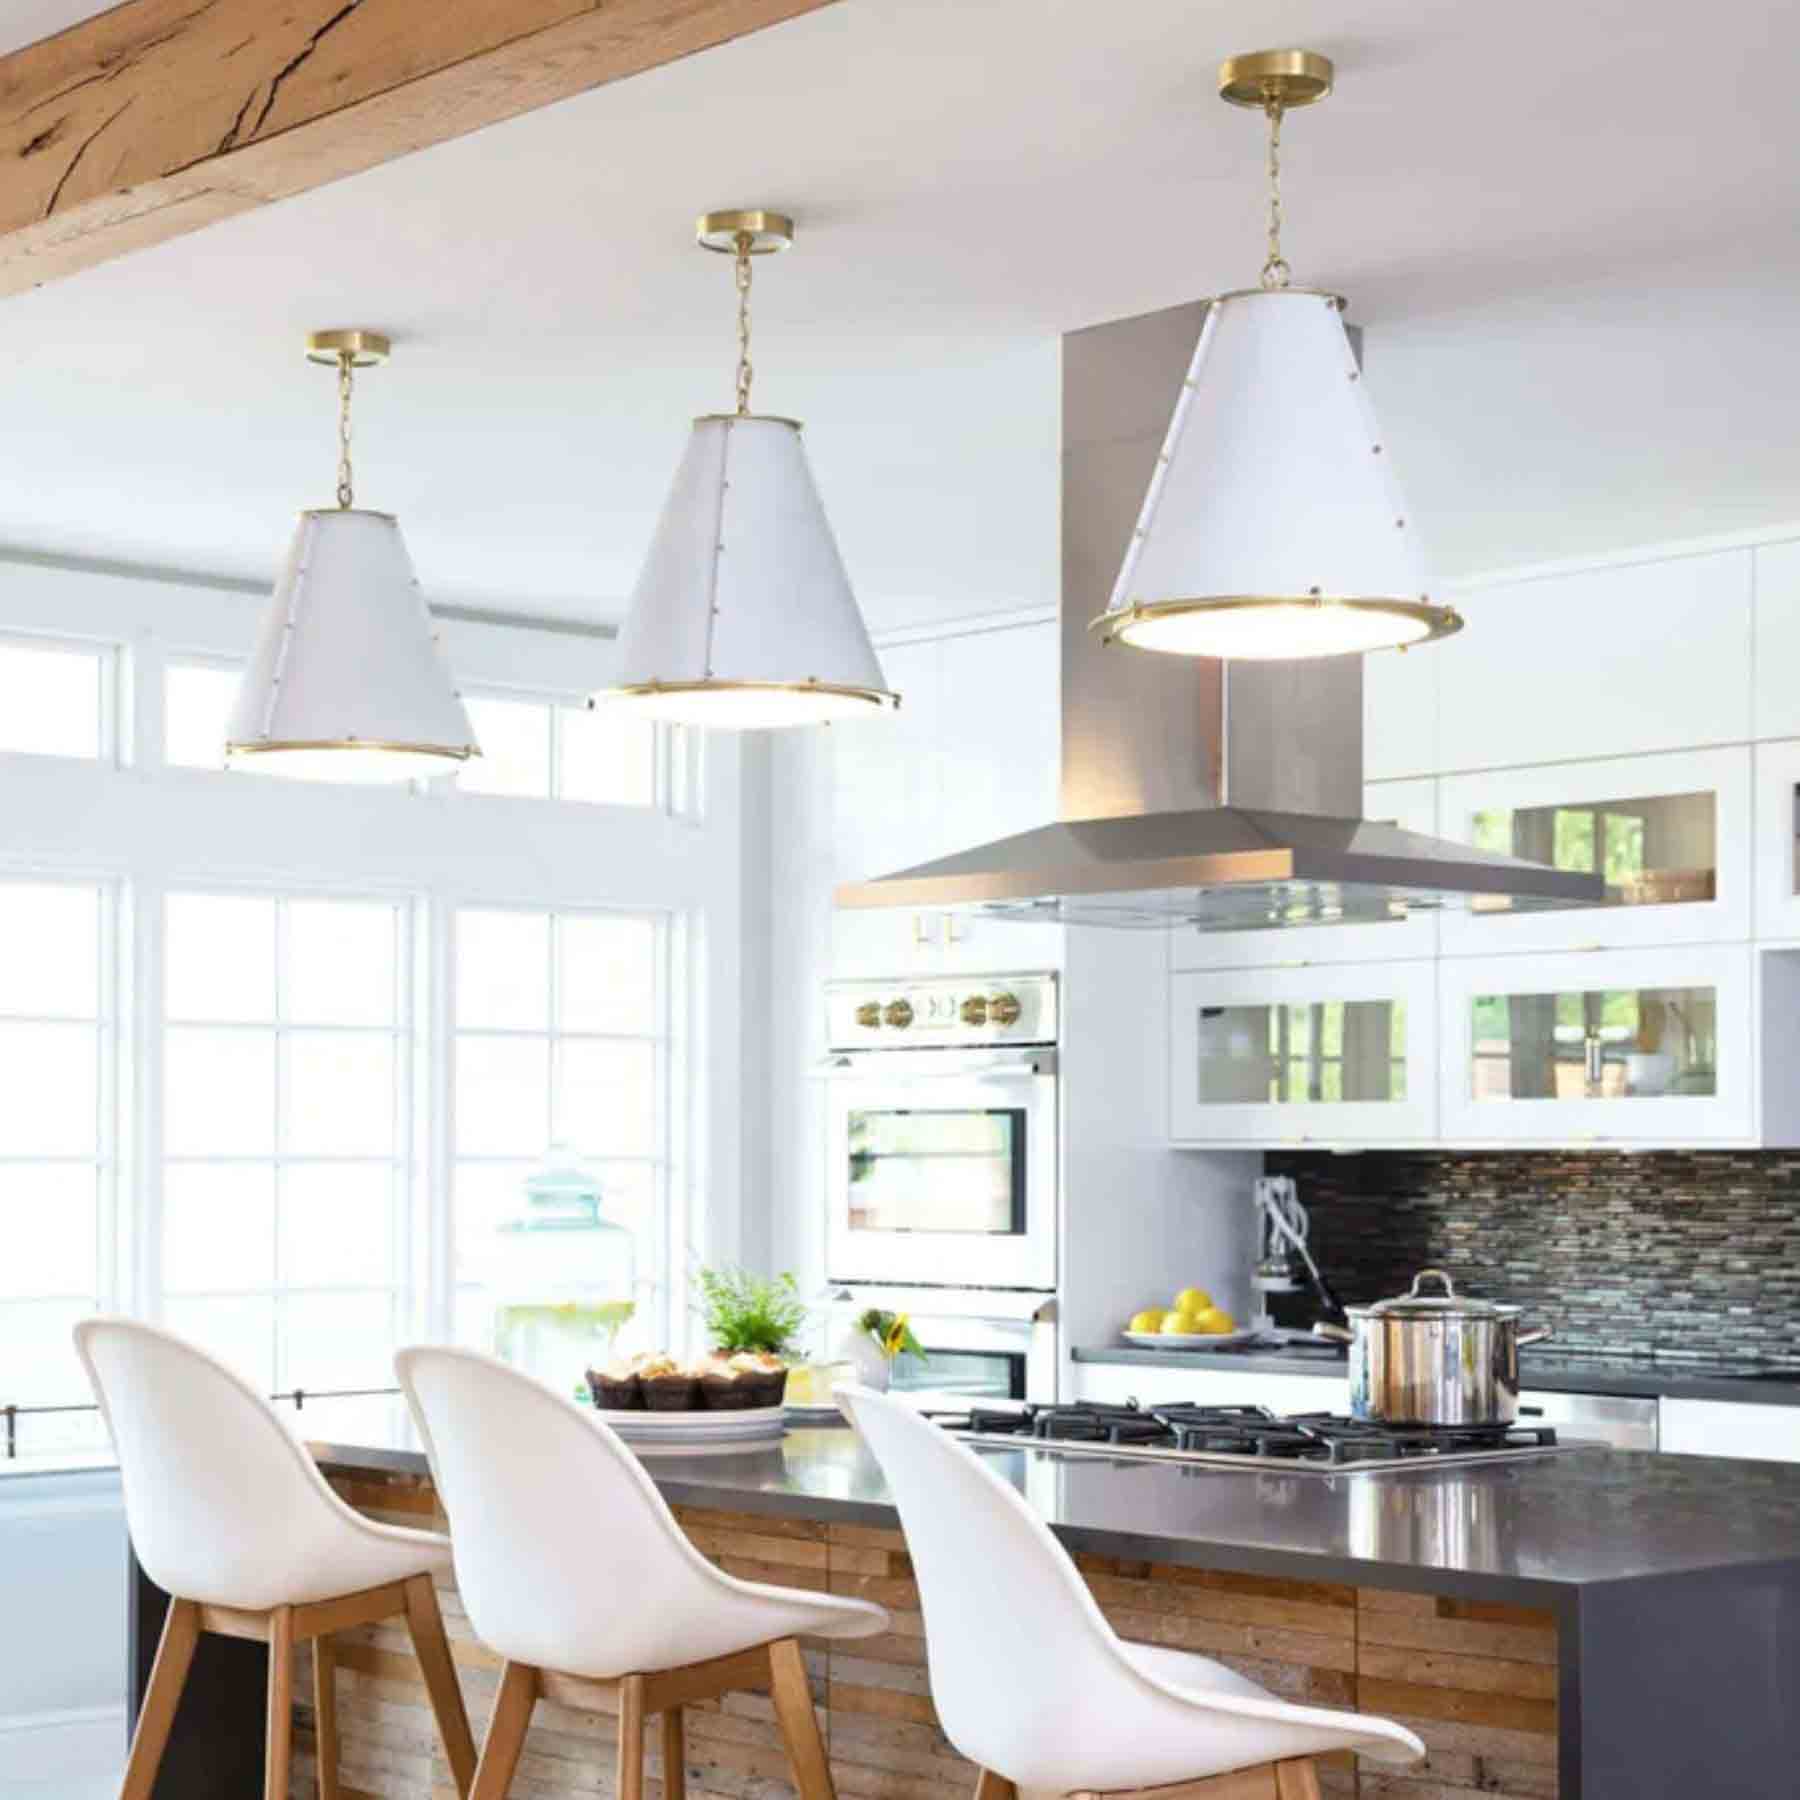 pairing the french maid pendant in groups of 2 3 enhances its refinement